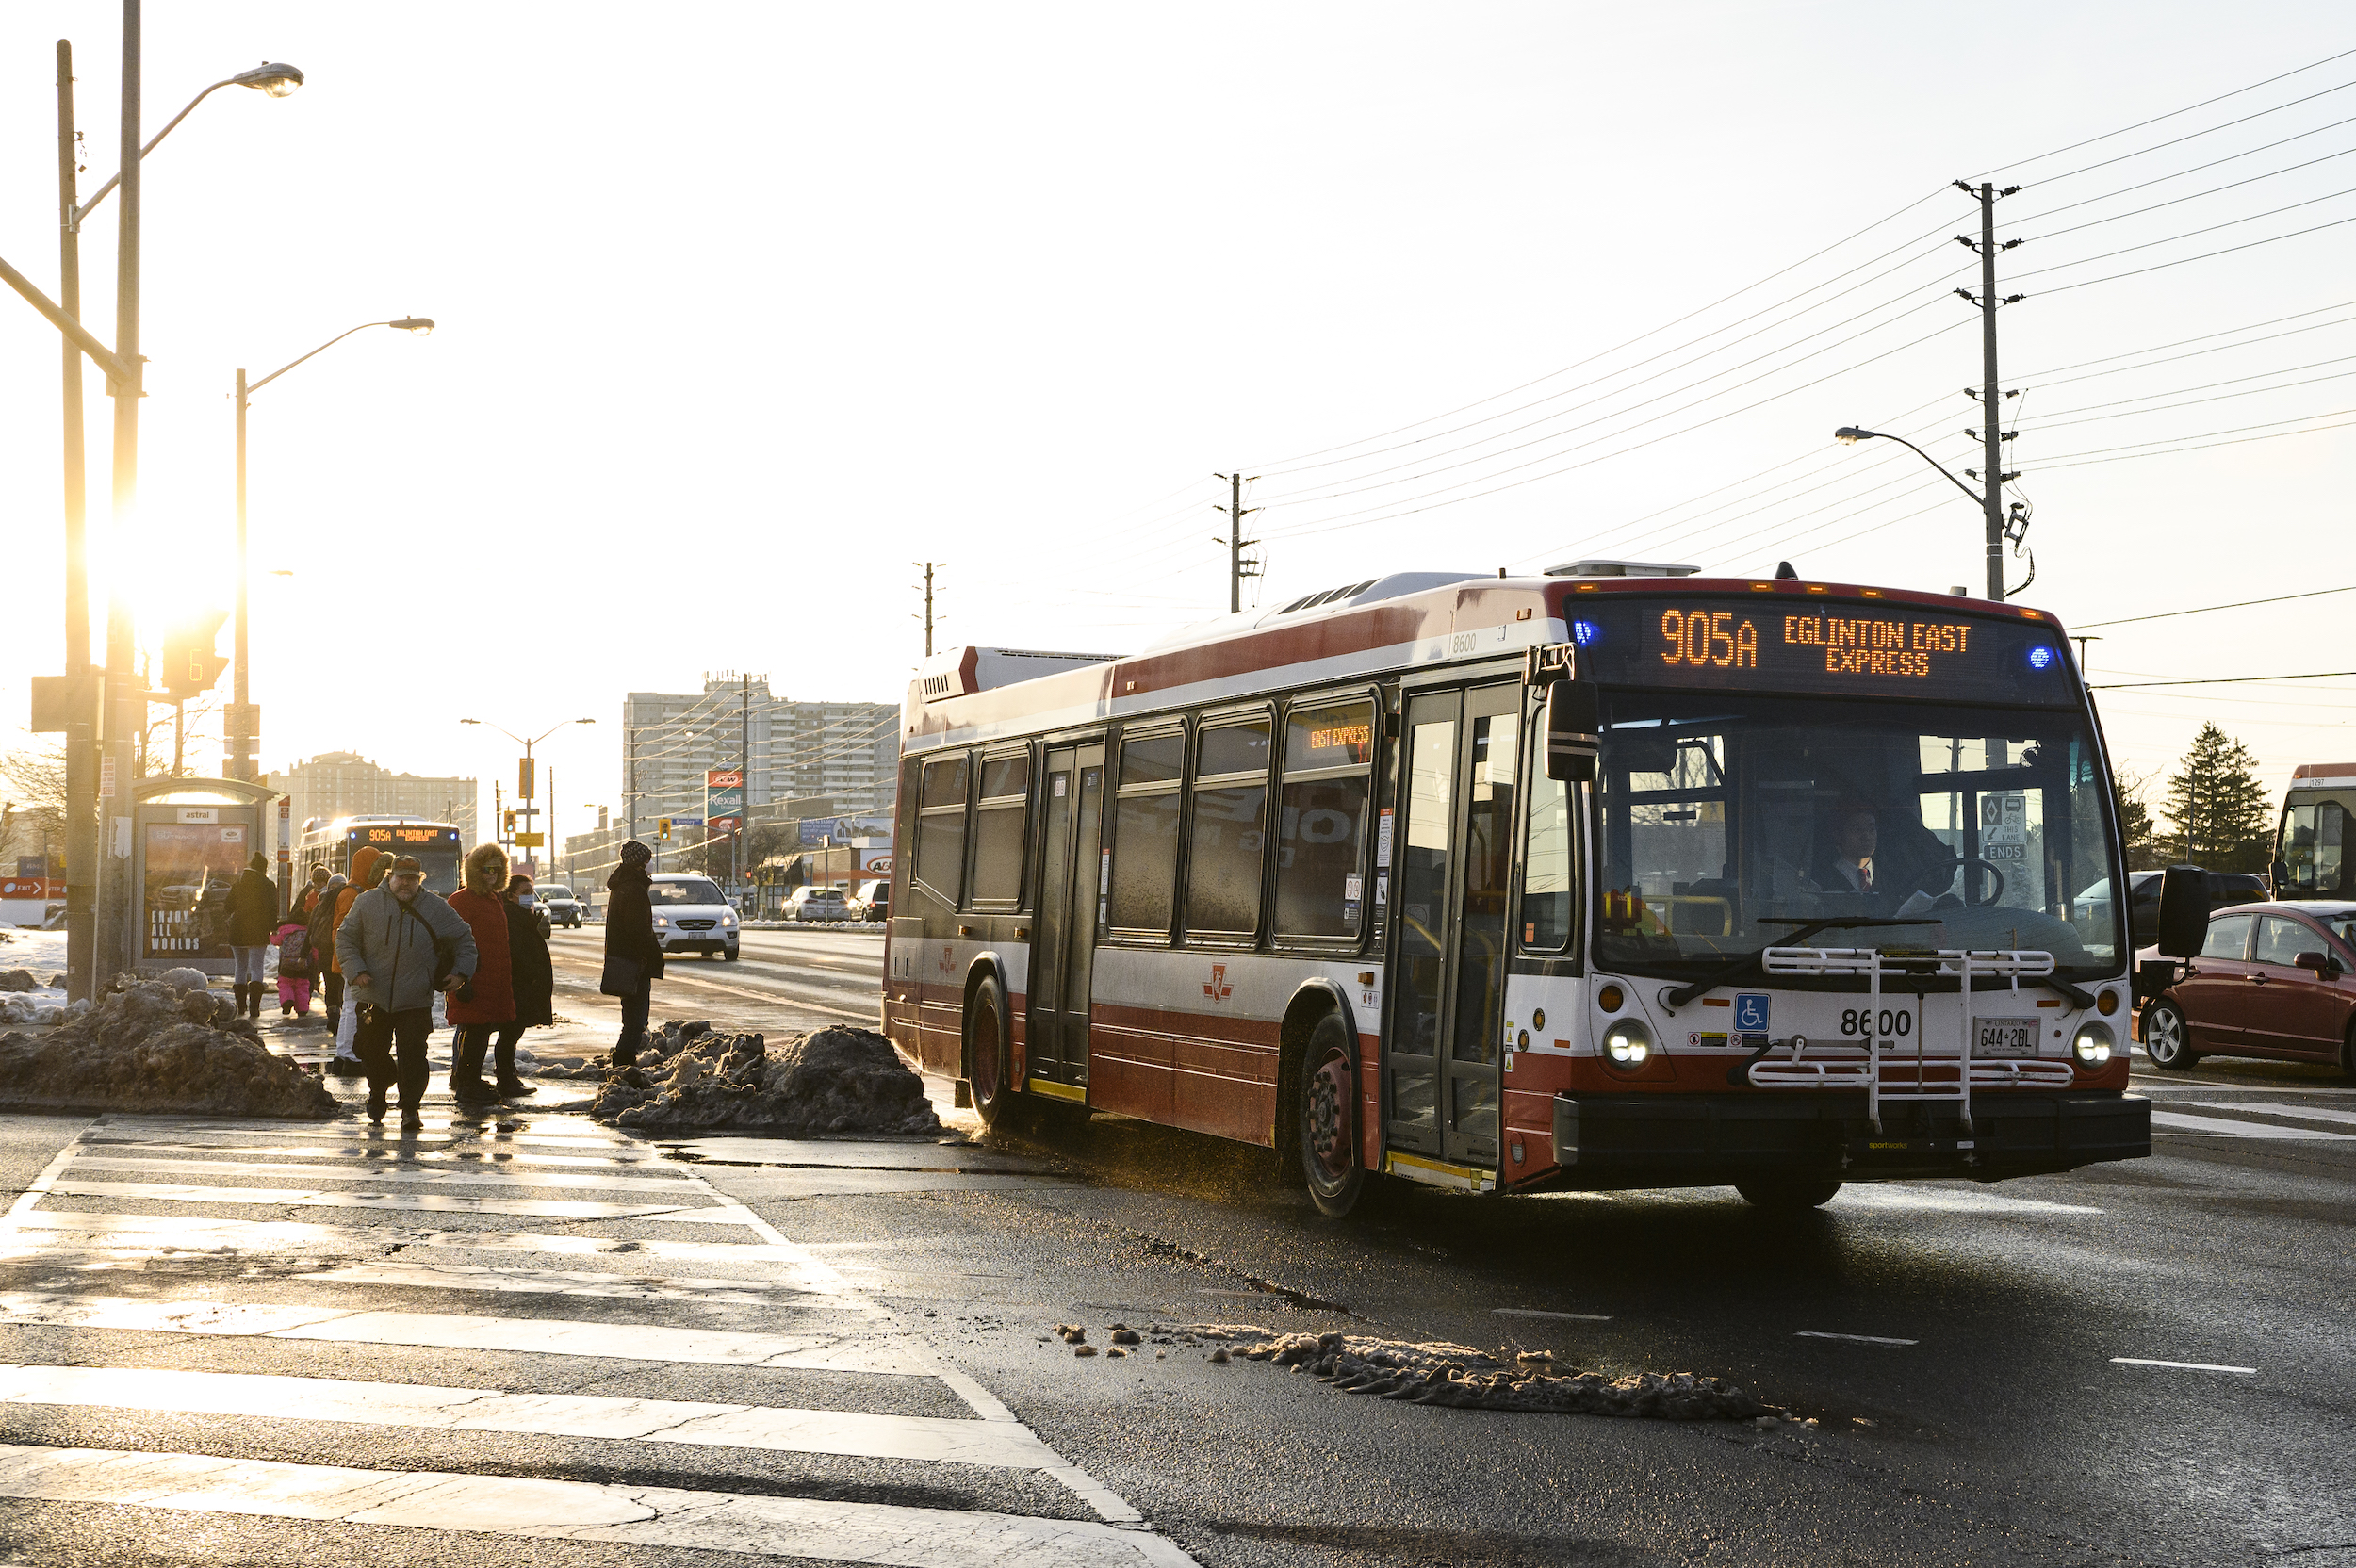 Regular riders on the 905 Eglinton East say that despite dedicated lanes, buses often get bunched up and all arrive at once, meaning there are long gaps in service. When a 905 bus does arrive, it fills up fast.